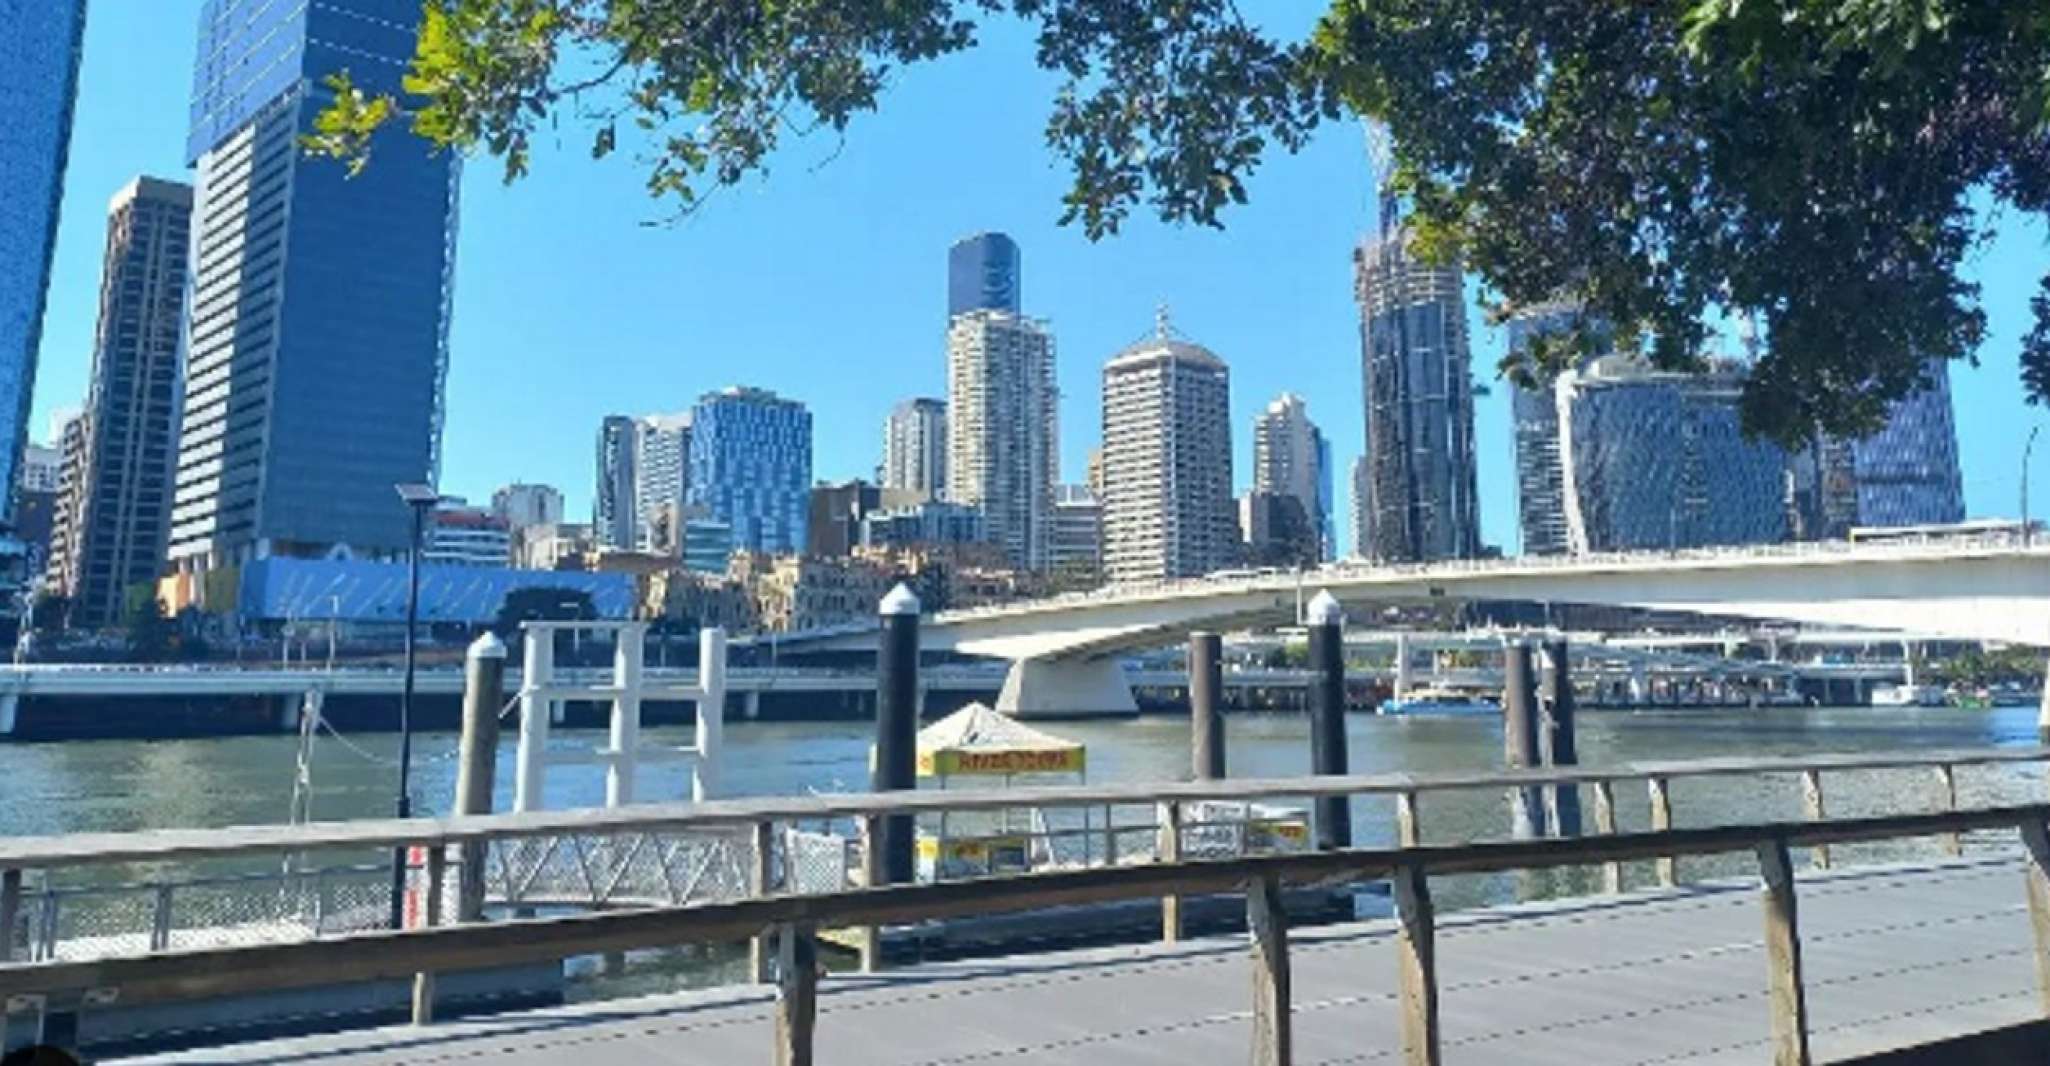 Discover Brisbane by Land and by River – Private tour - Housity